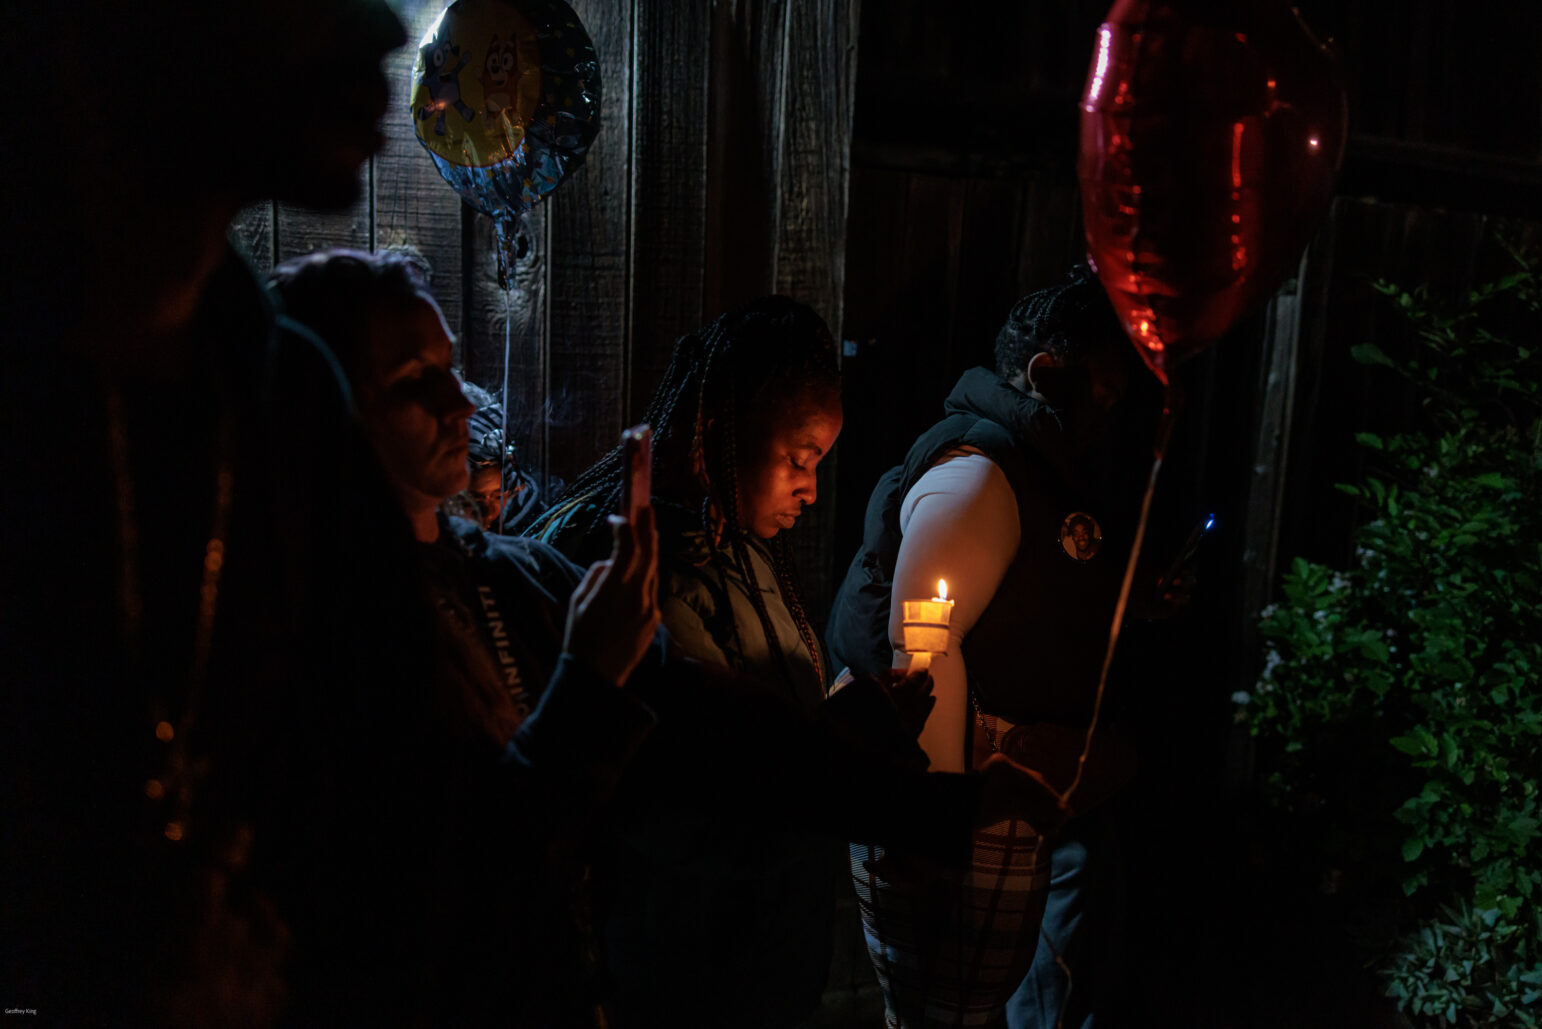 A somber night-time vigil with people holding candles and balloons. The mood is reflective and mournful, with individuals paying respects at a memorial, their faces illuminated softly by the candlelight.